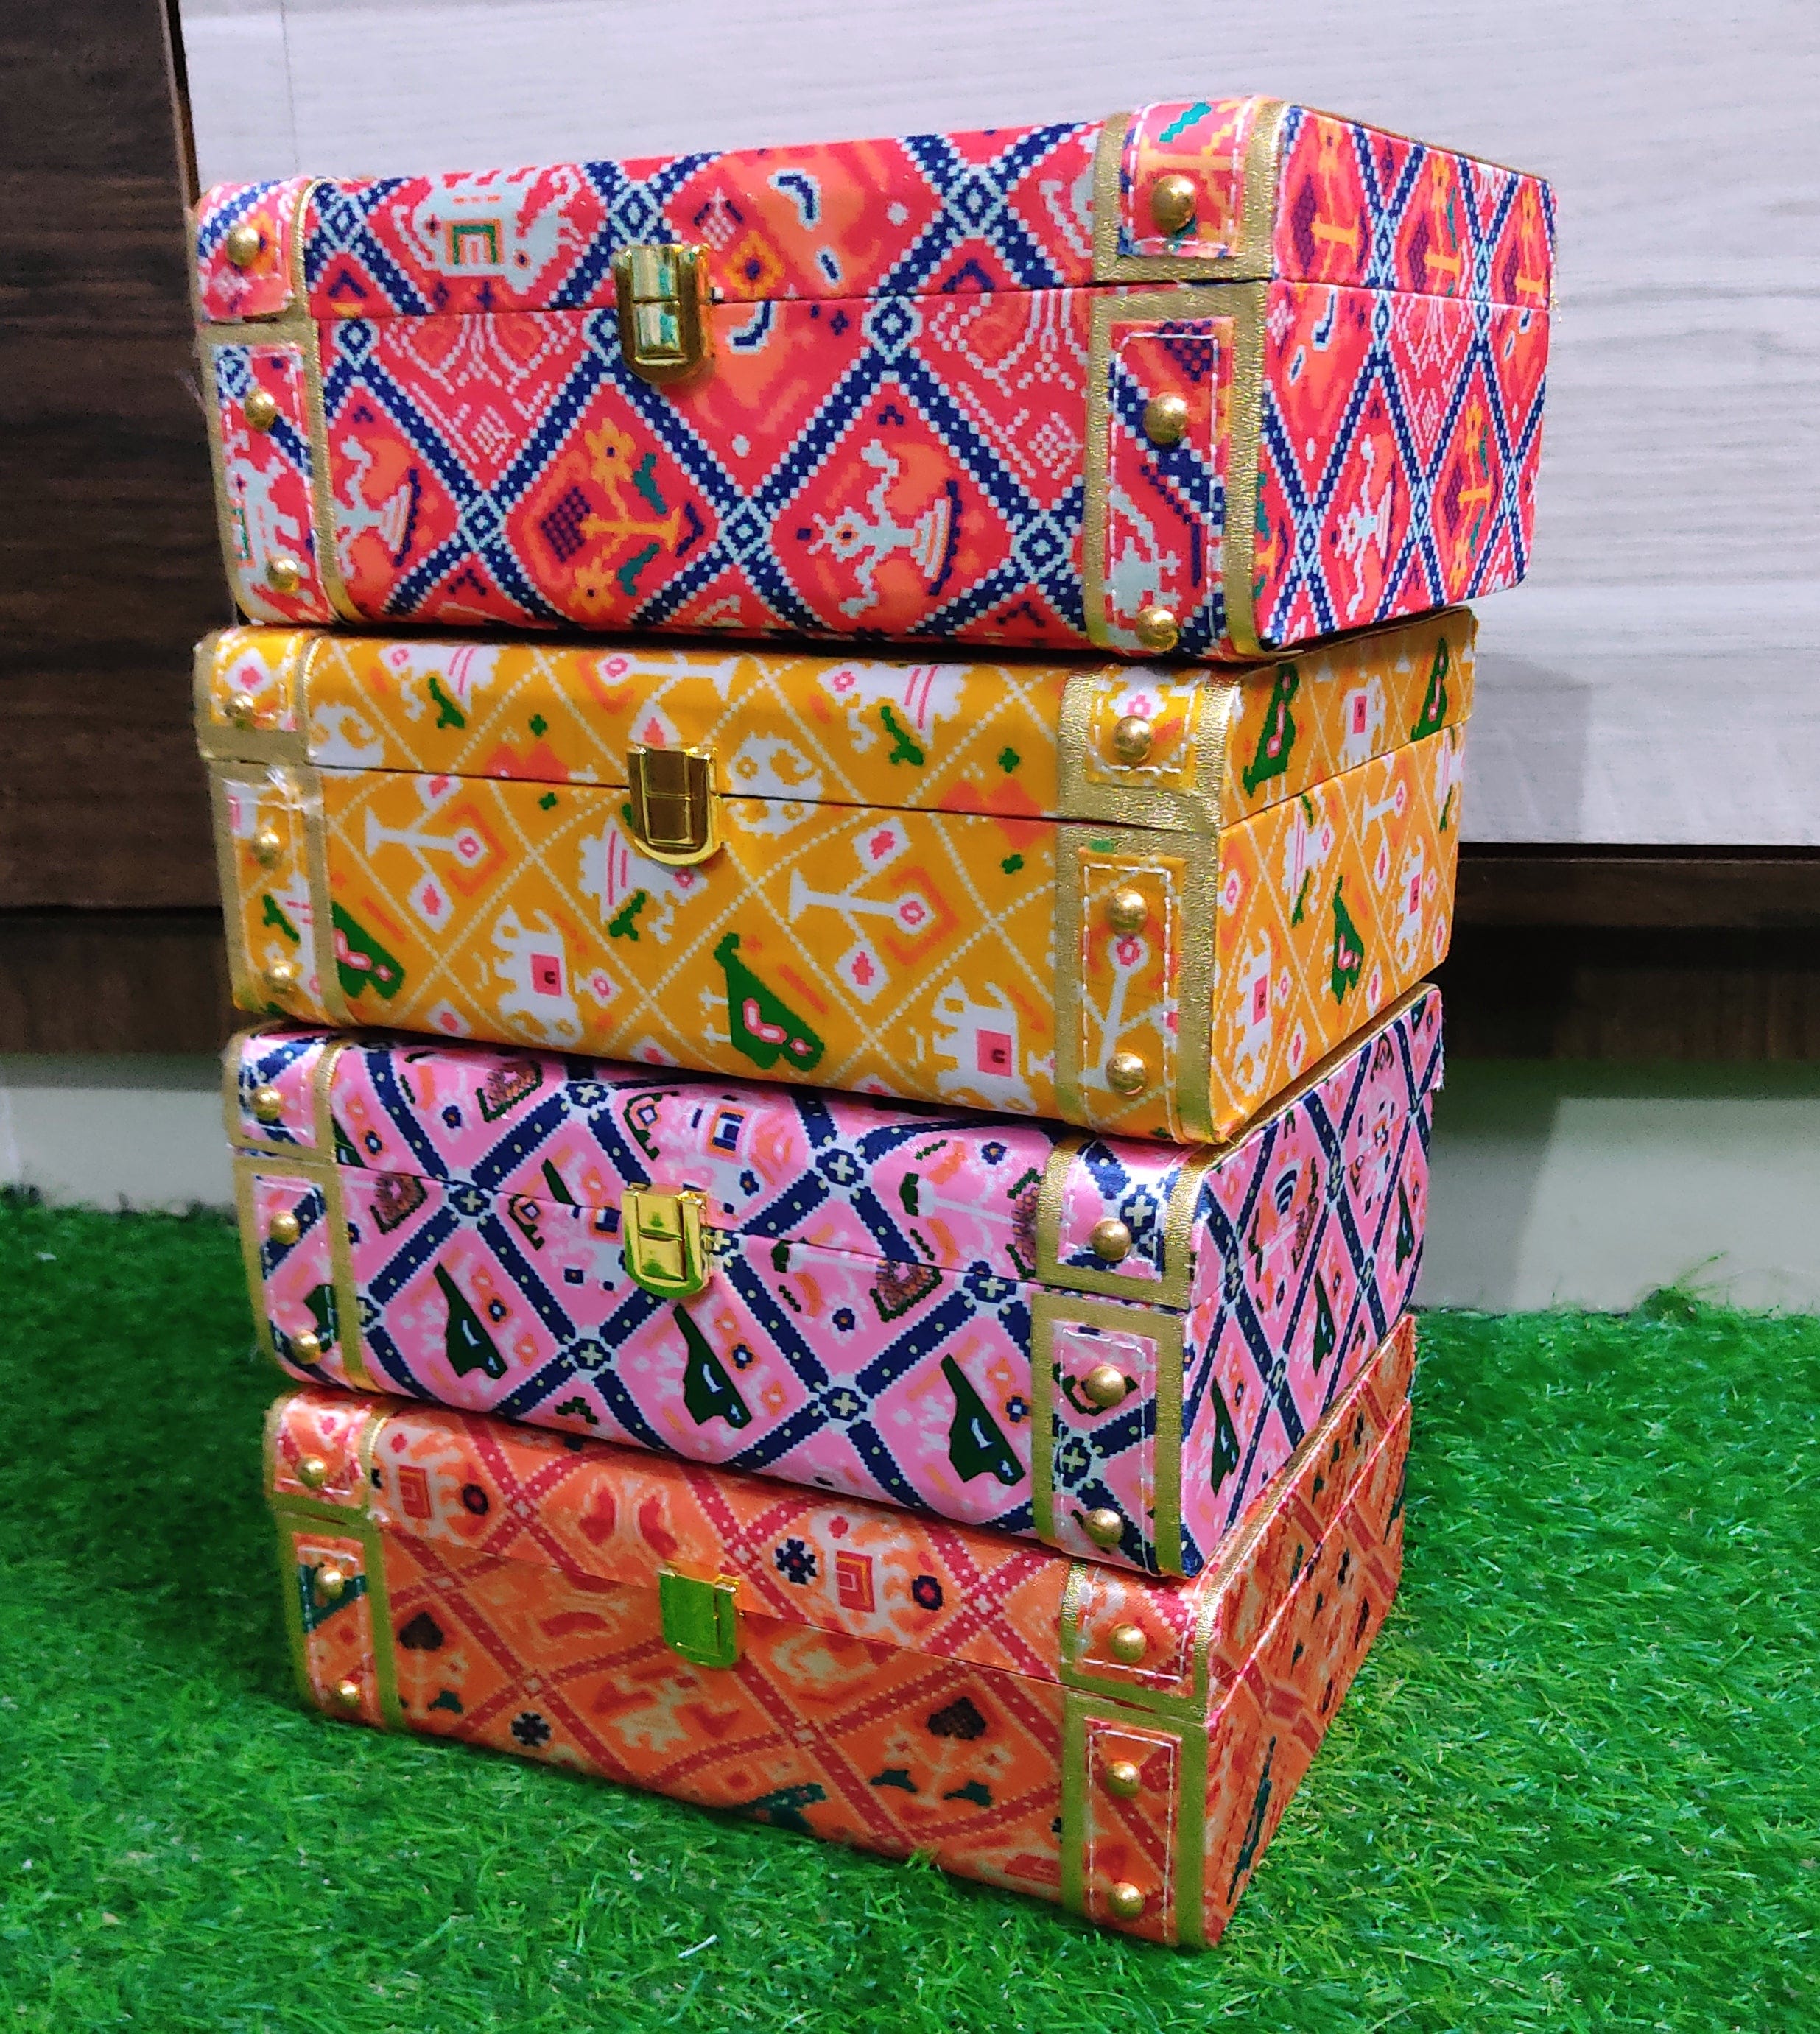 Crafting this trousseau trunk set dipped in a bridal red